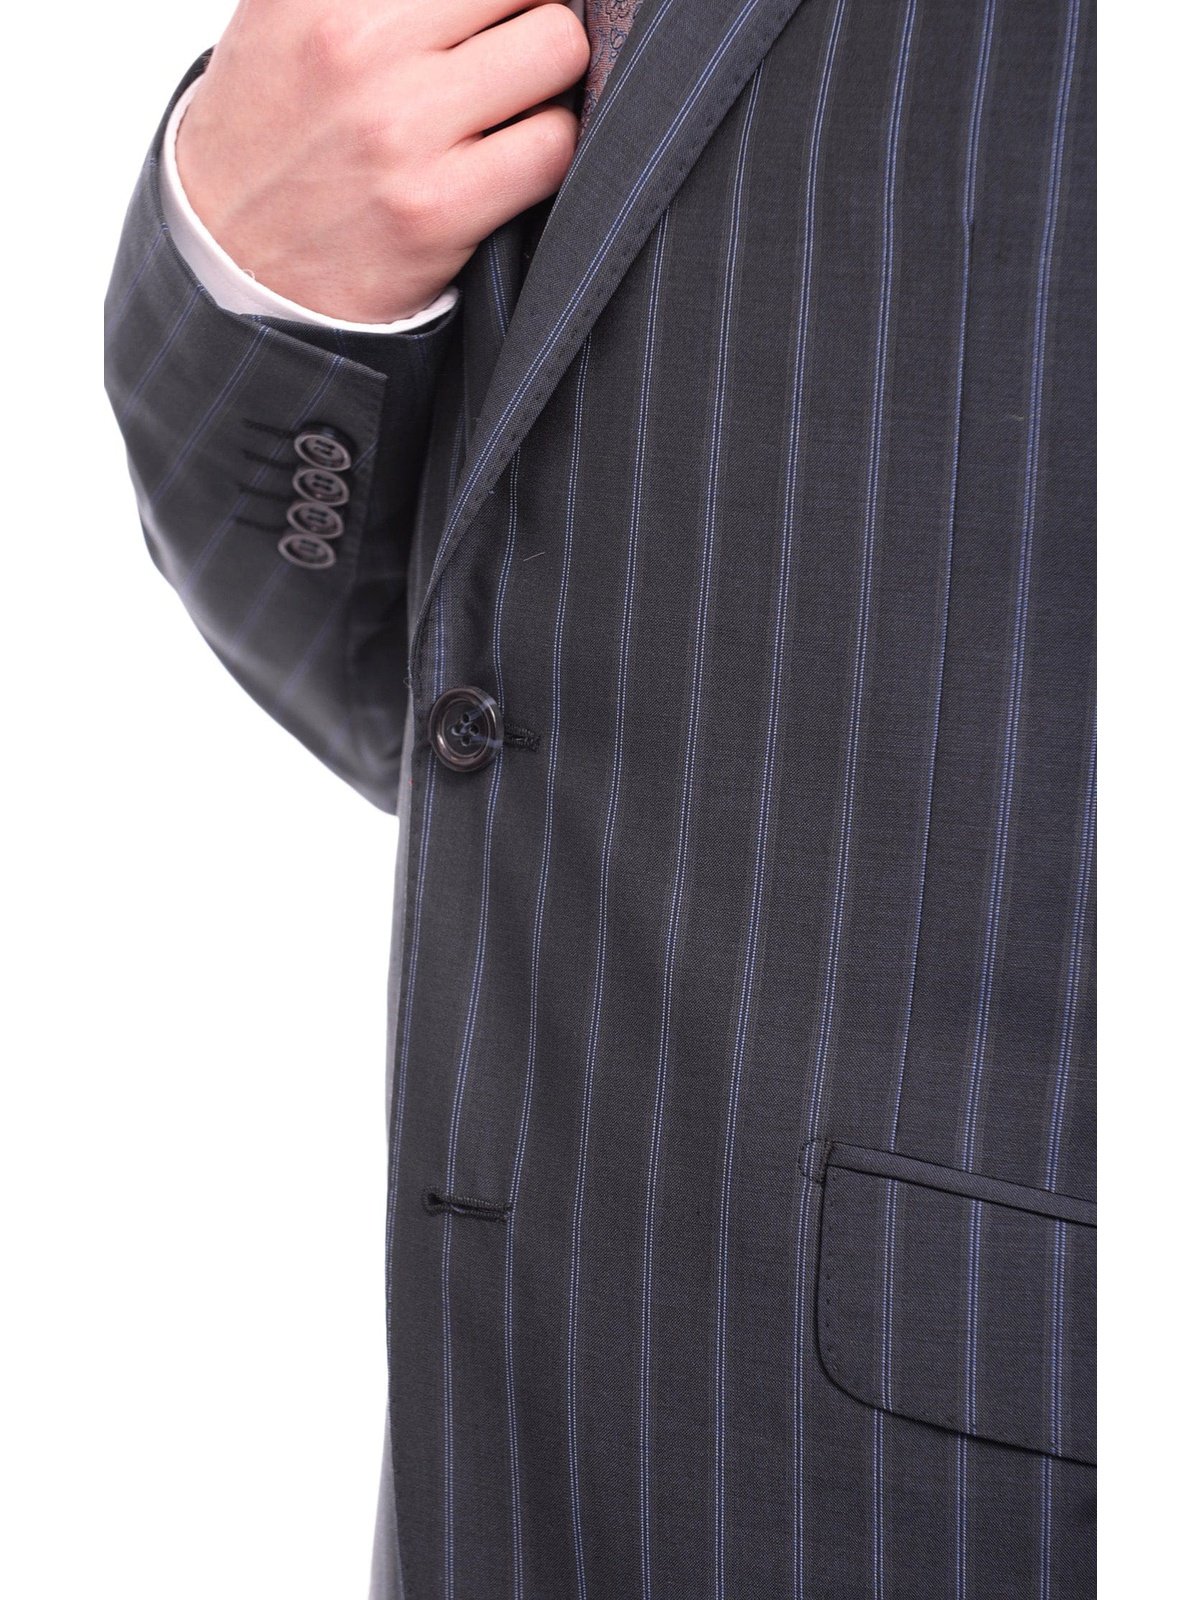 Napoli TWO PIECE SUITS Napoli Slim Fit Navy Blue Pinstripe Two Button Half Canvassed Wool Suit